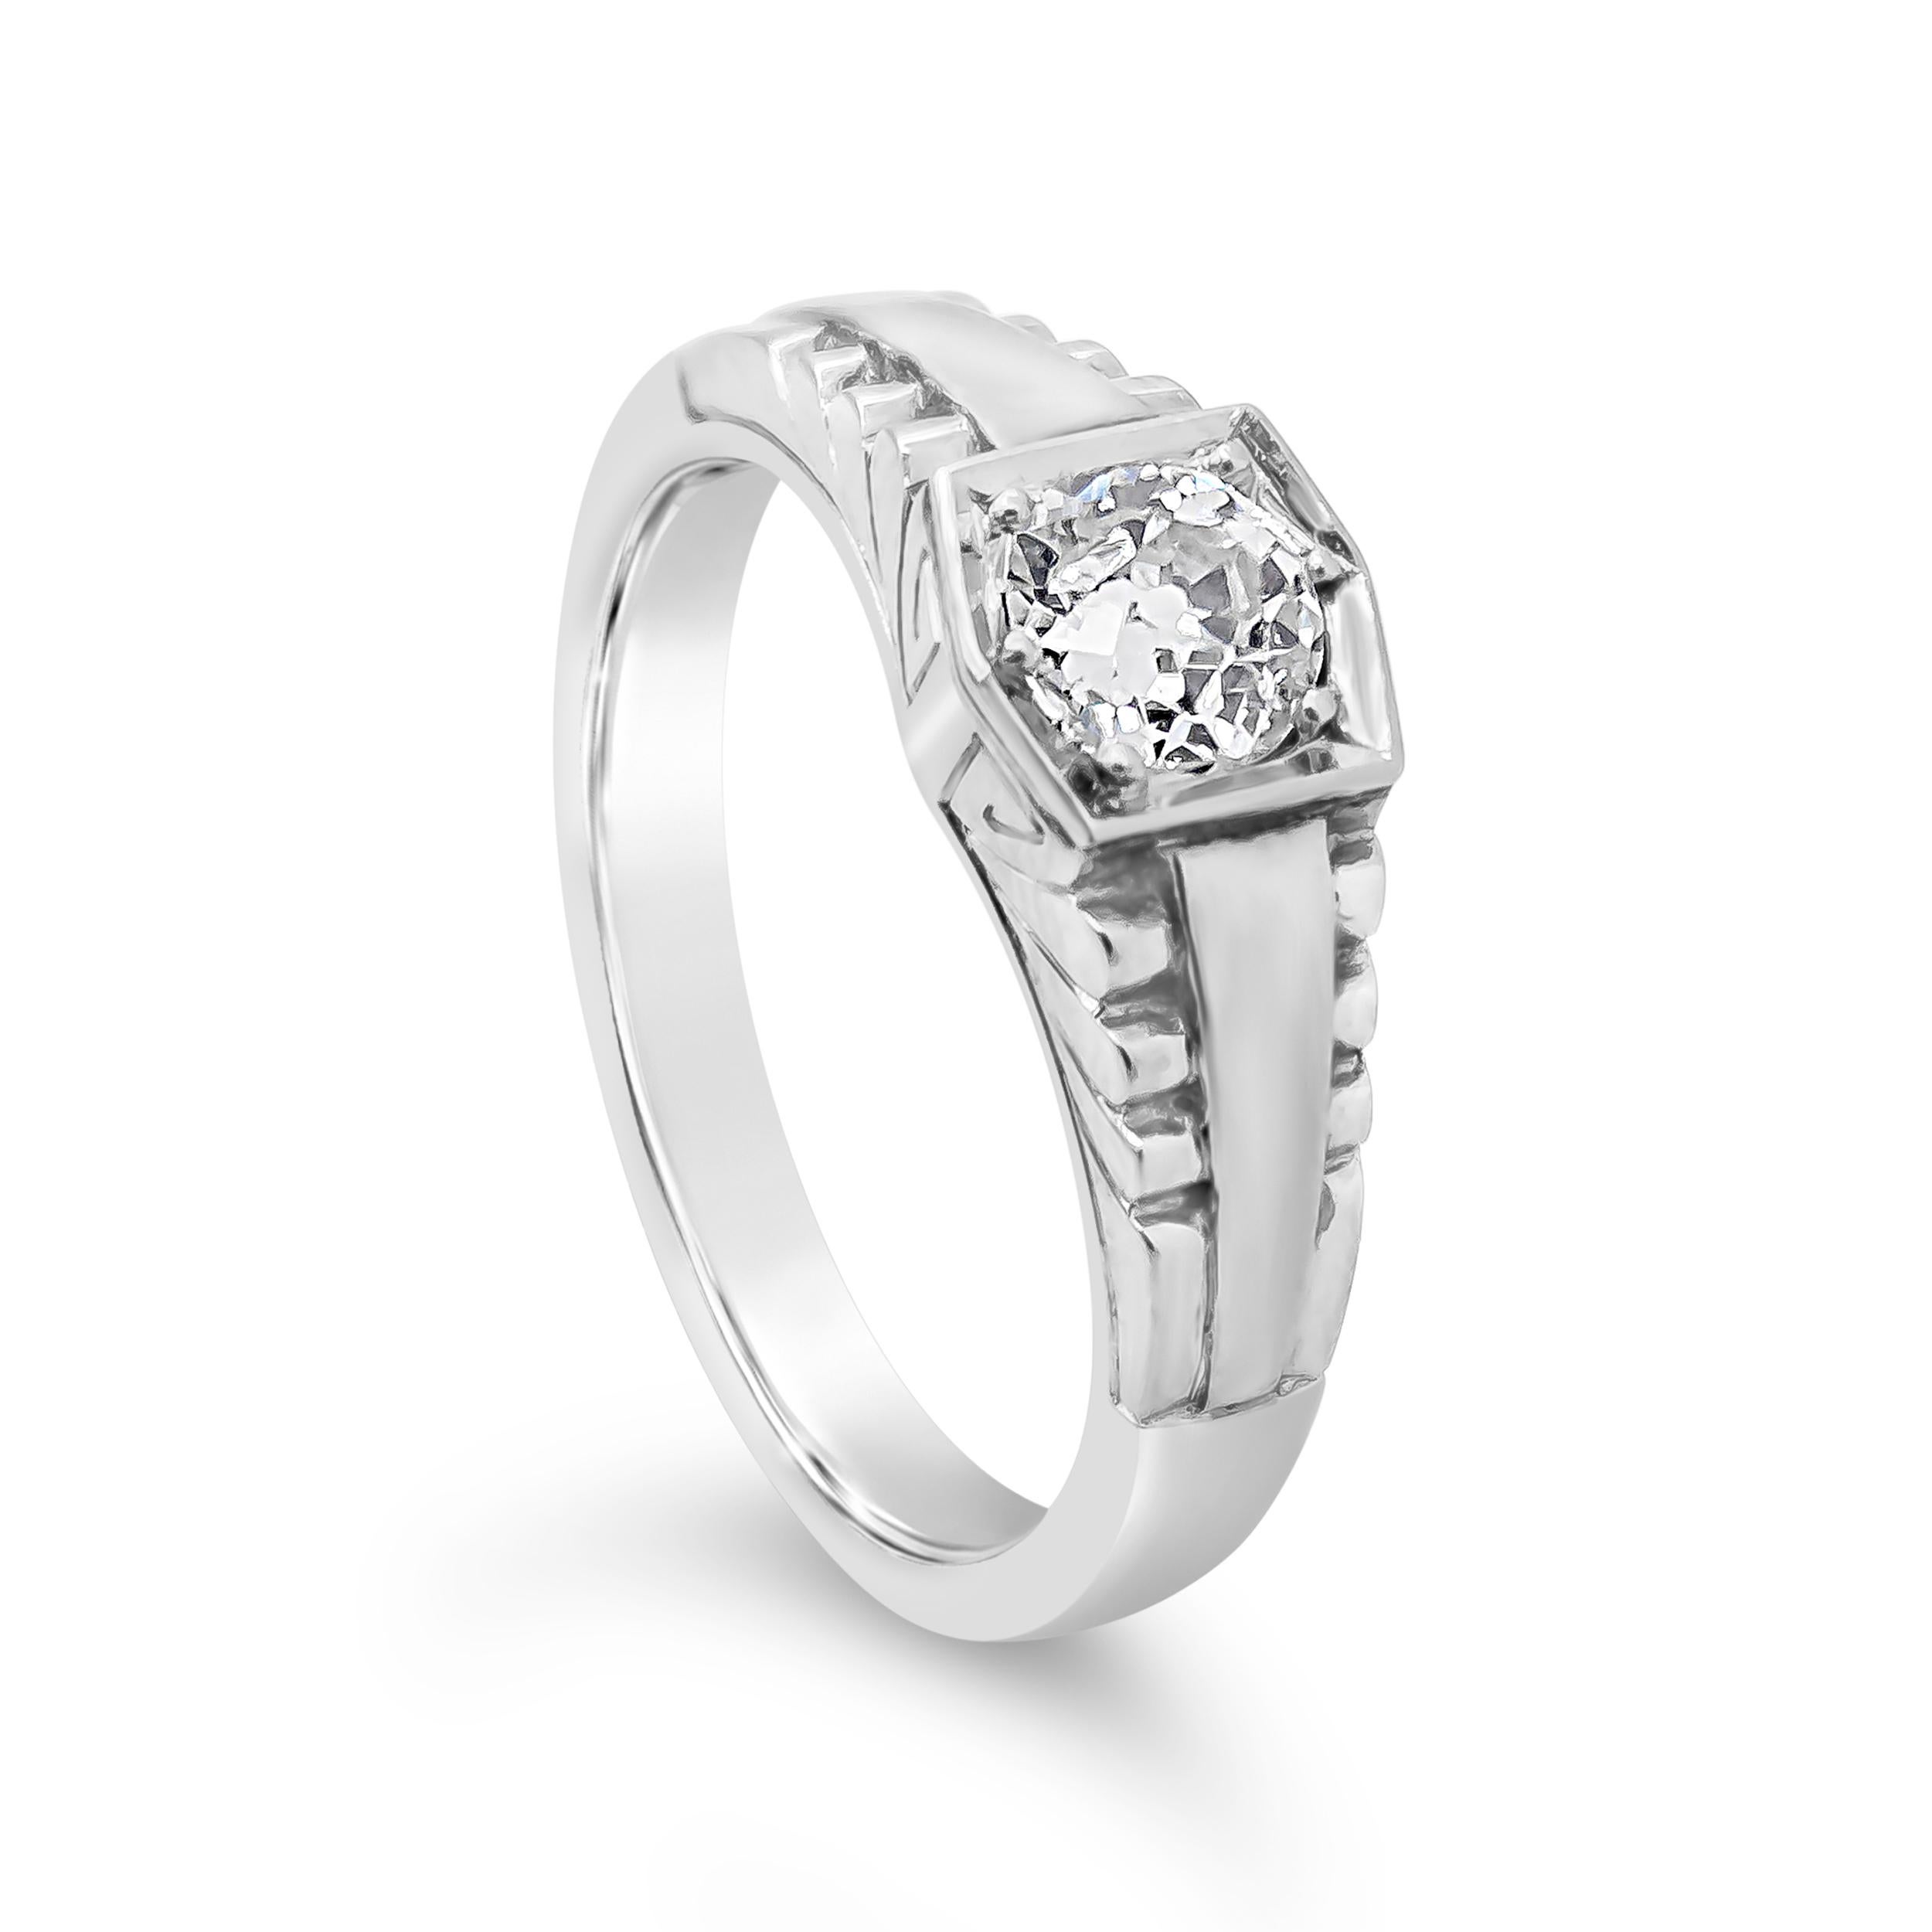 A unisex antique style band showcasing a 0.59 carats old mine cut diamond, secured with six prongs, in a unique setting. Diamond is approximately G color, VS2 clarity. Made in 18k white gold. Size 8 US resizable upon request. 



